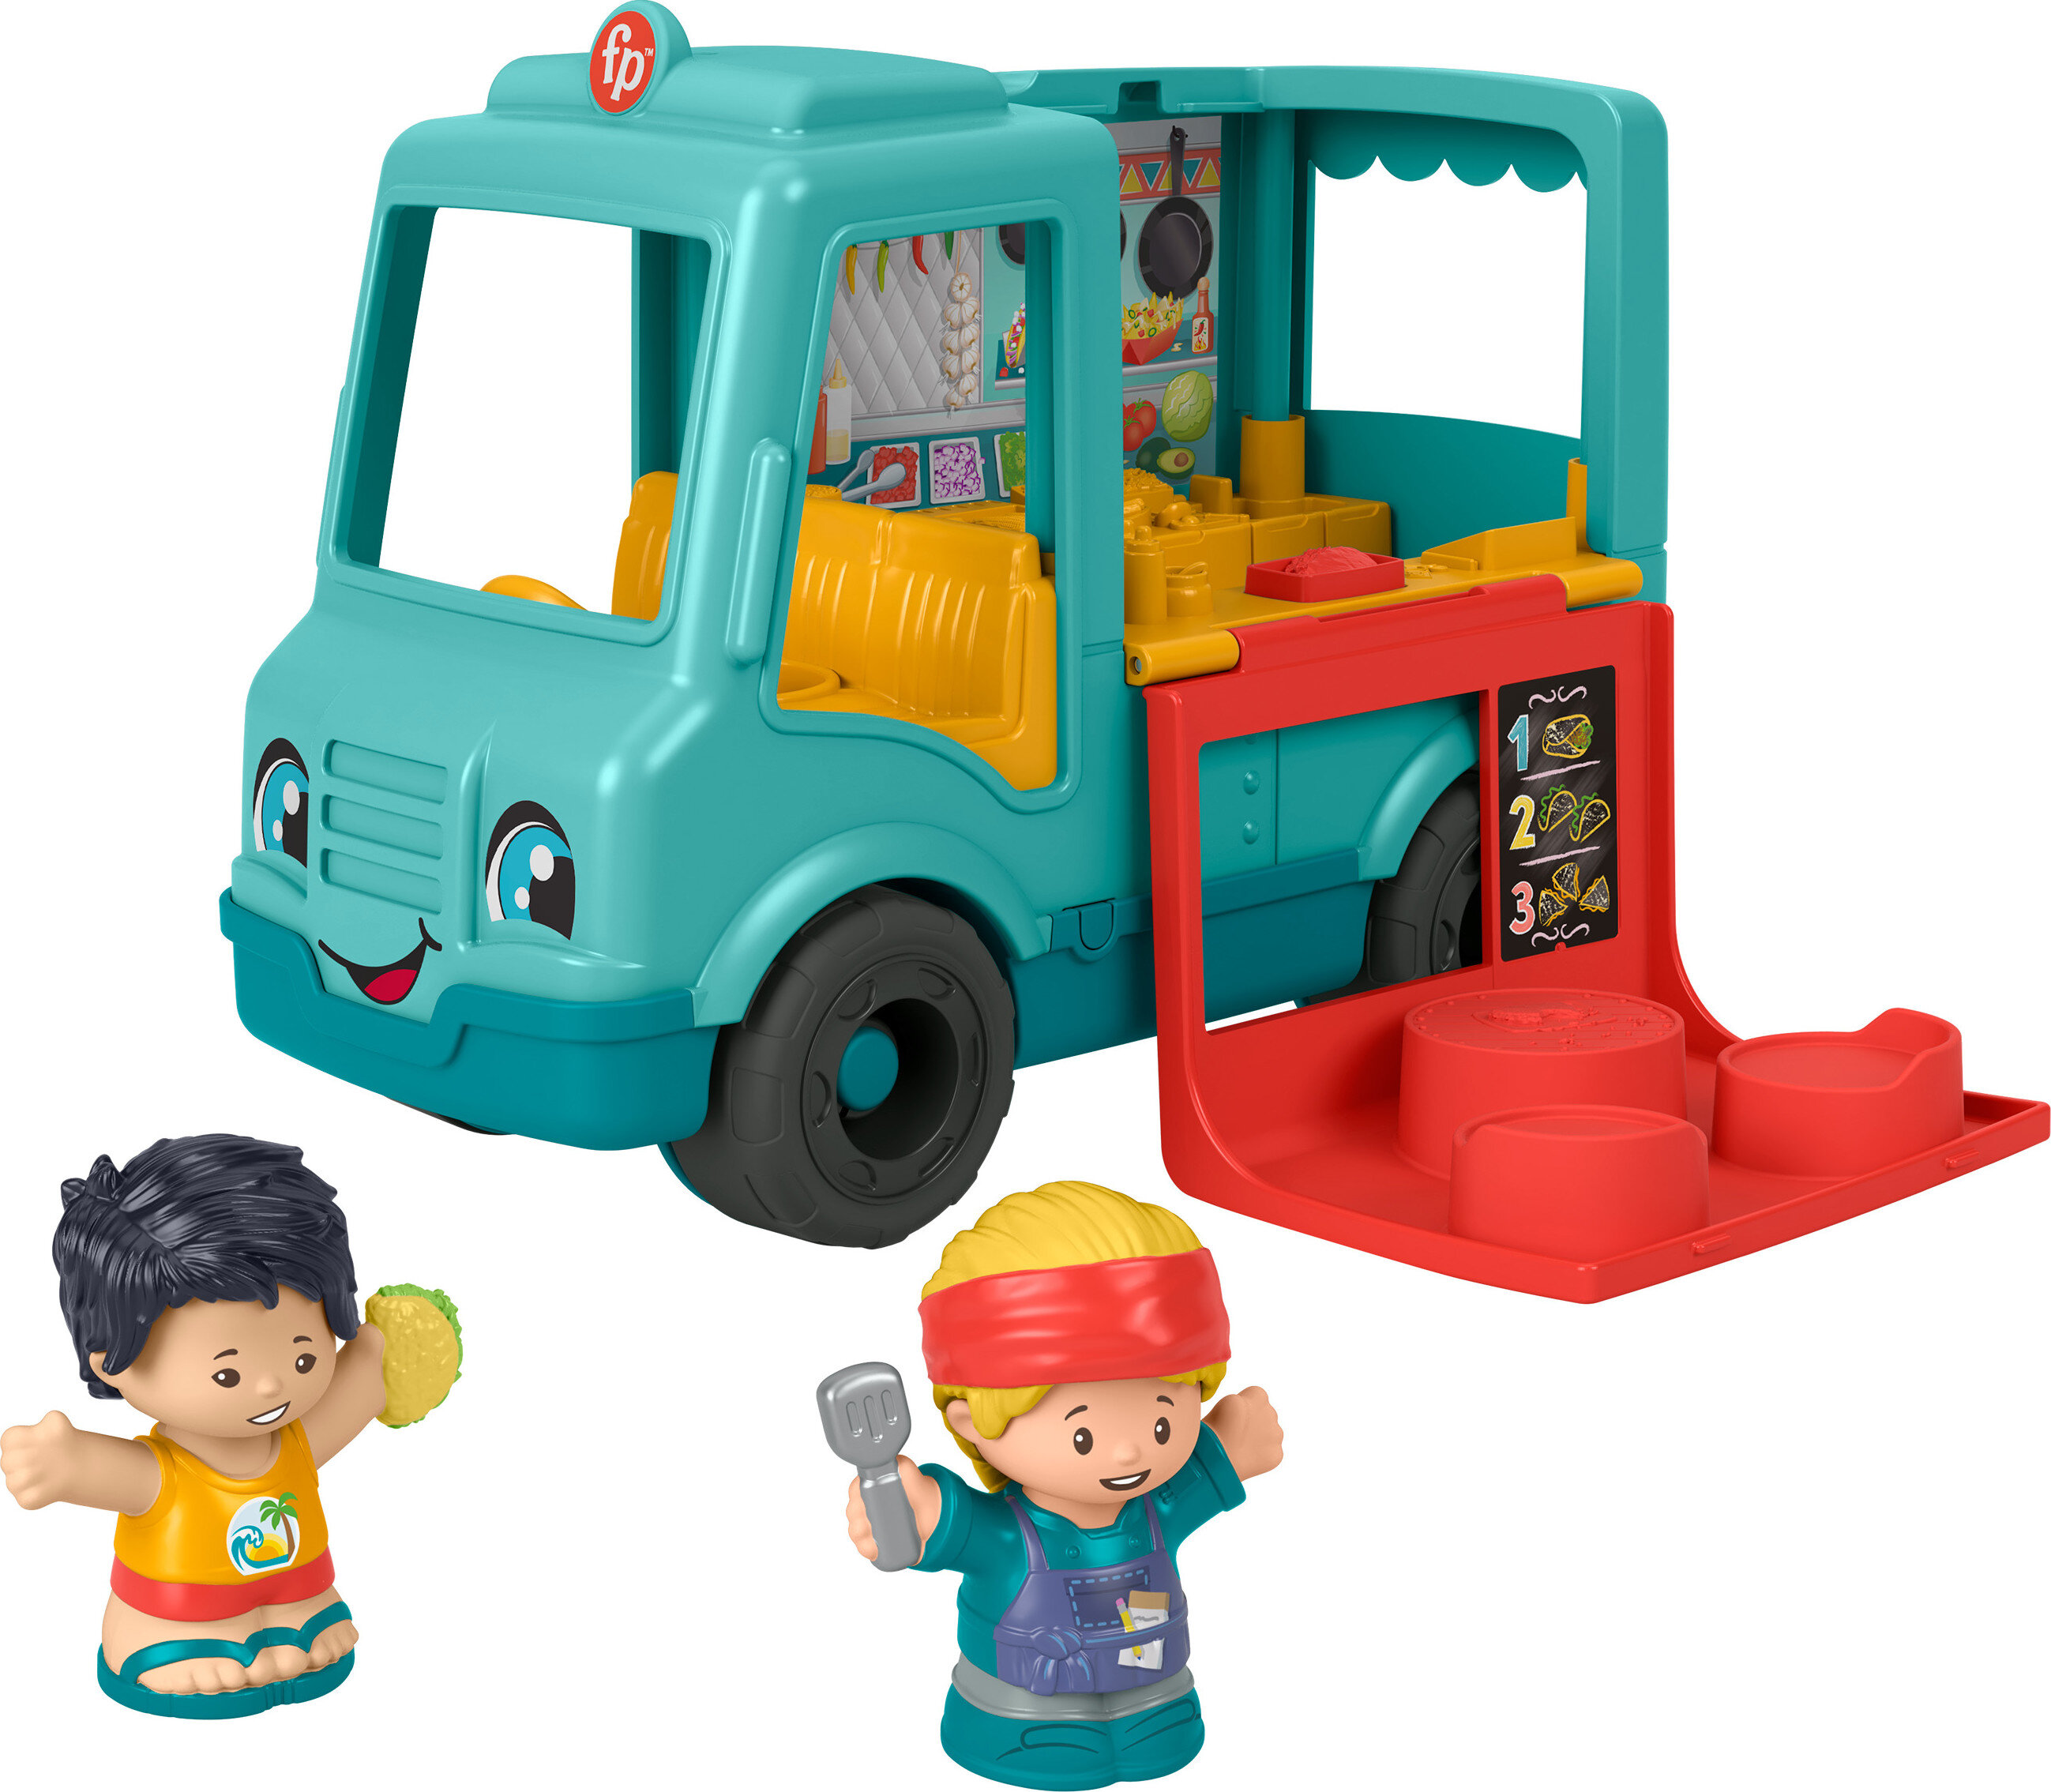 Fisher-Price Little People Serve It Up Food Truck Musical Toddler Toy with 2 Figures - image 1 of 6